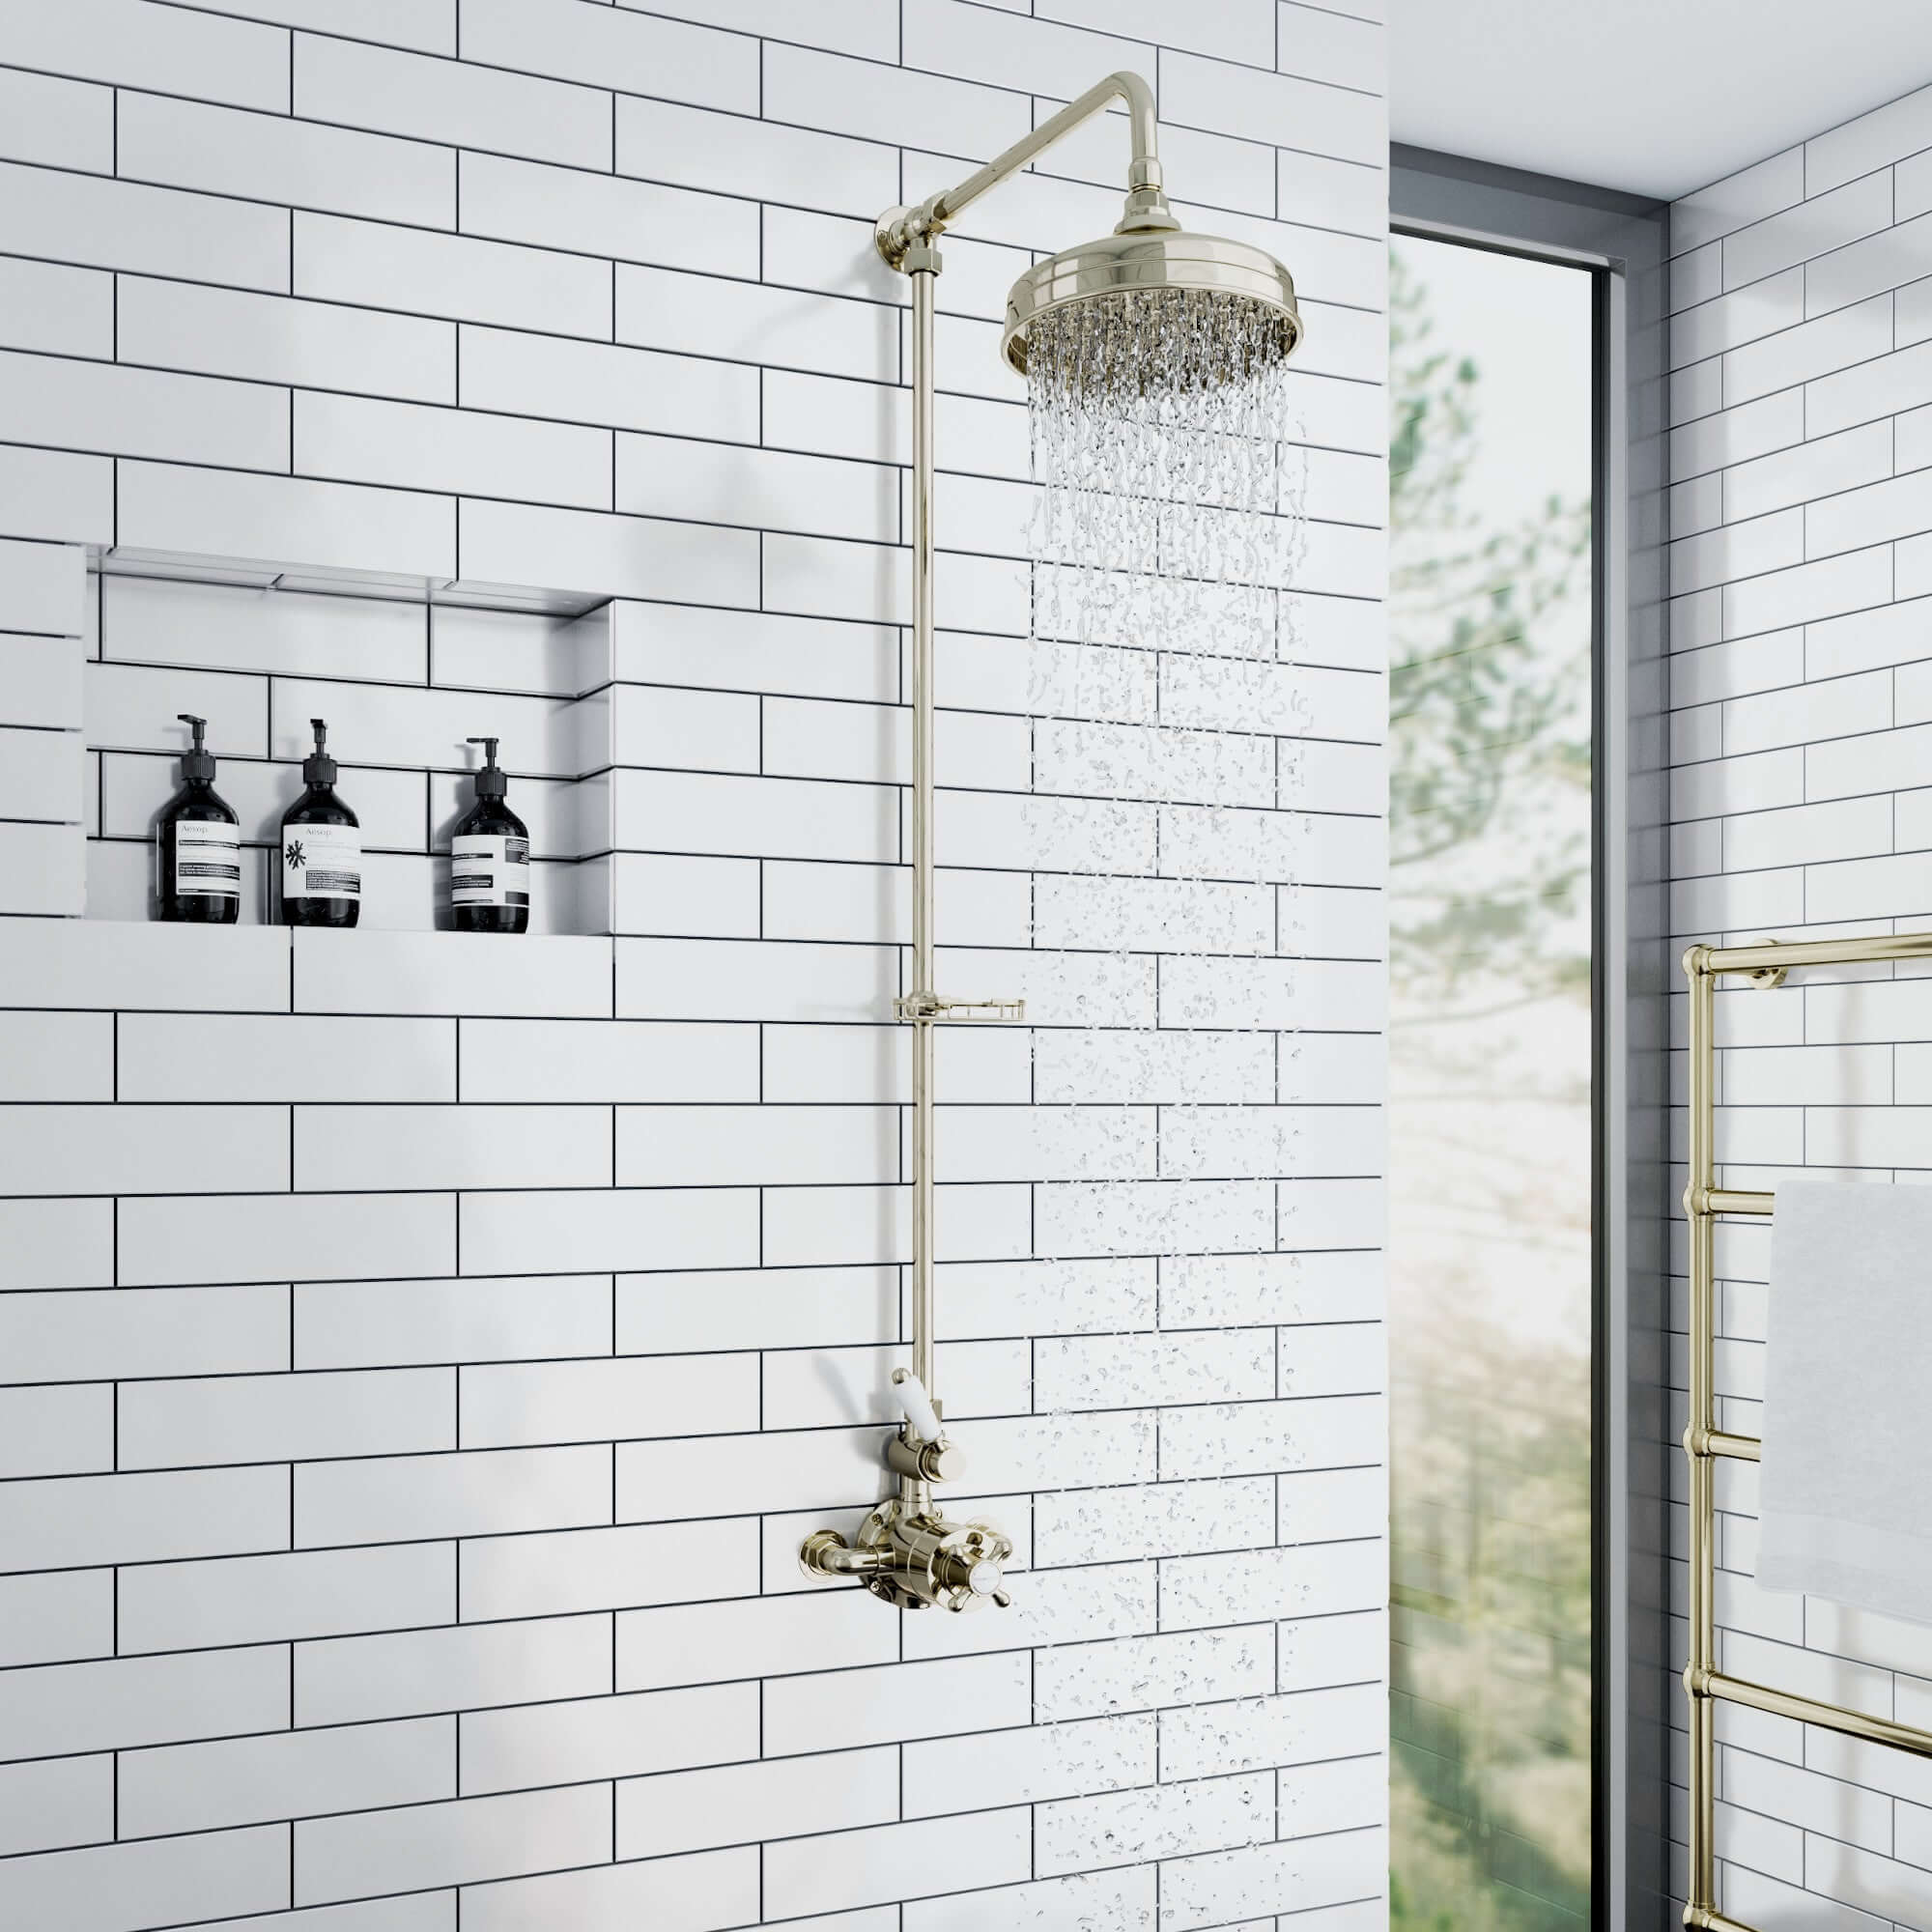 Downton Exposed Traditional Thermostatic Shower Set Single Outlet Incl. Twin Shower Valve, Rigid Riser Rail, 200mm Shower Head & Caddy - English Gold And White - Showers